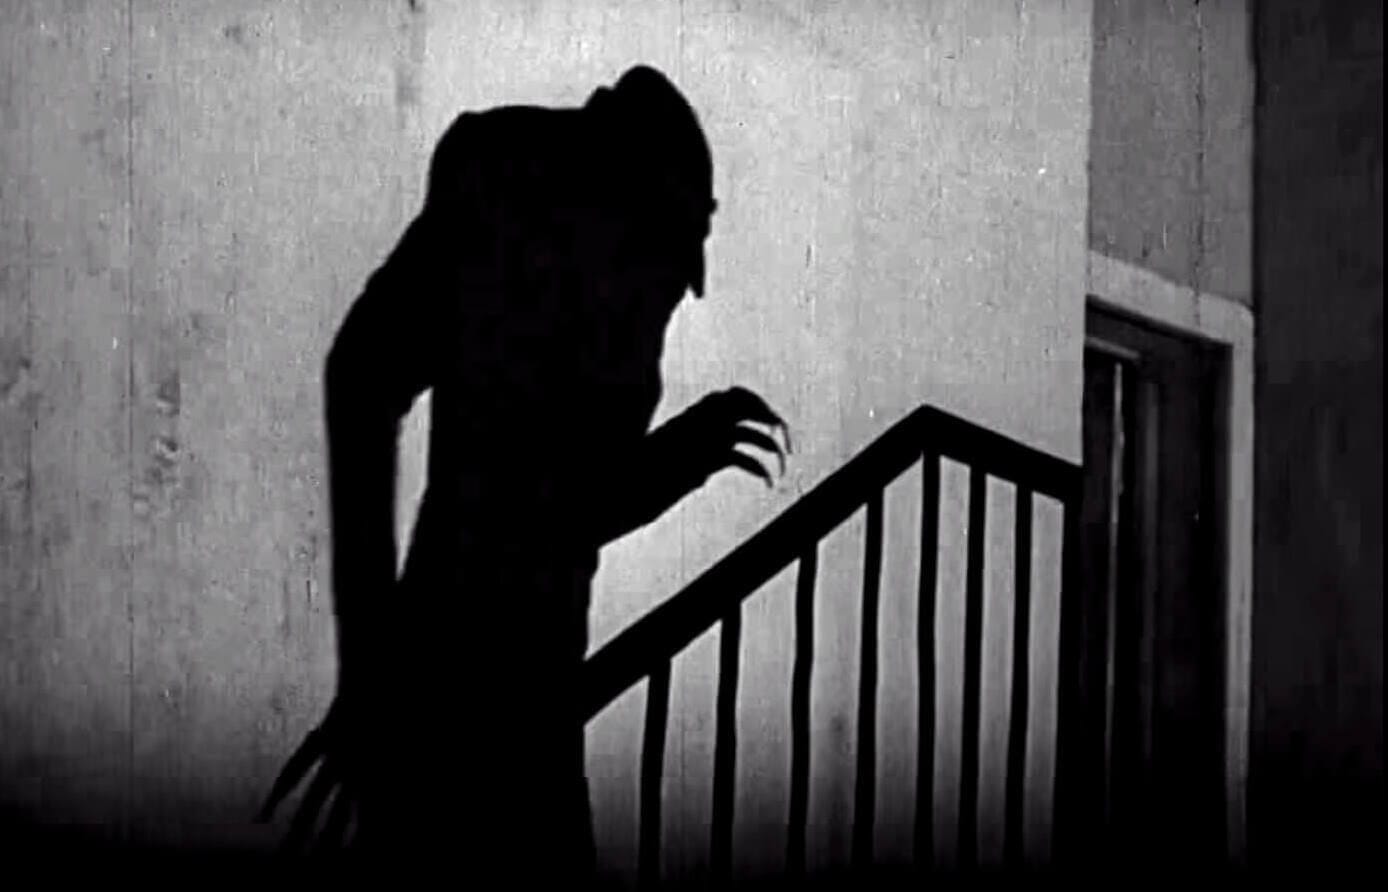 Nosferatu, the ancient vampire, casts an ominous shadow.